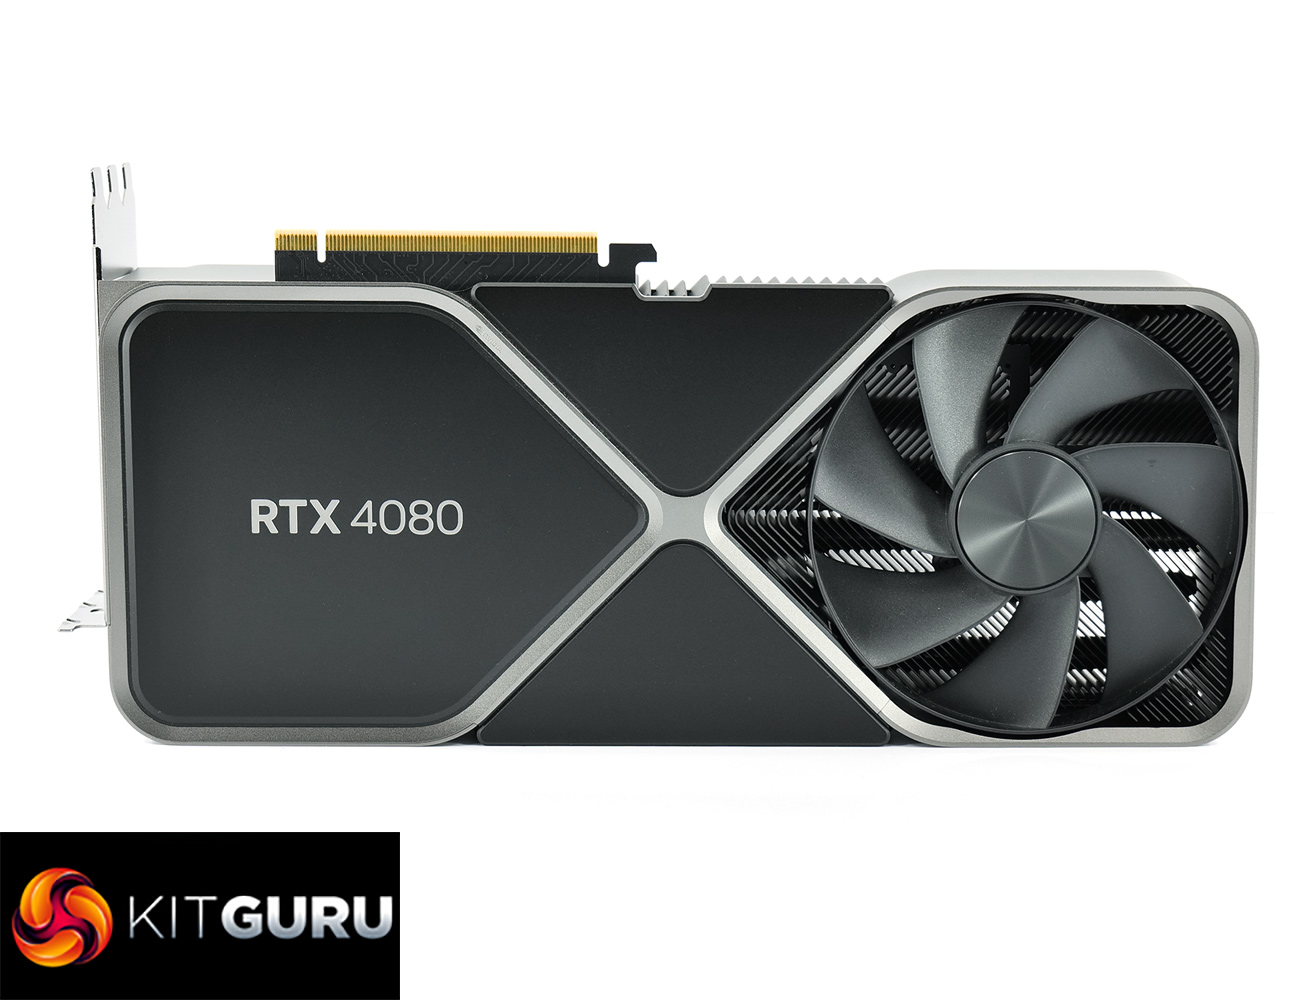 NVIDIA is said to be preparing a GeForce RTX 4080 Ti card at the same price  as the RTX 4080.